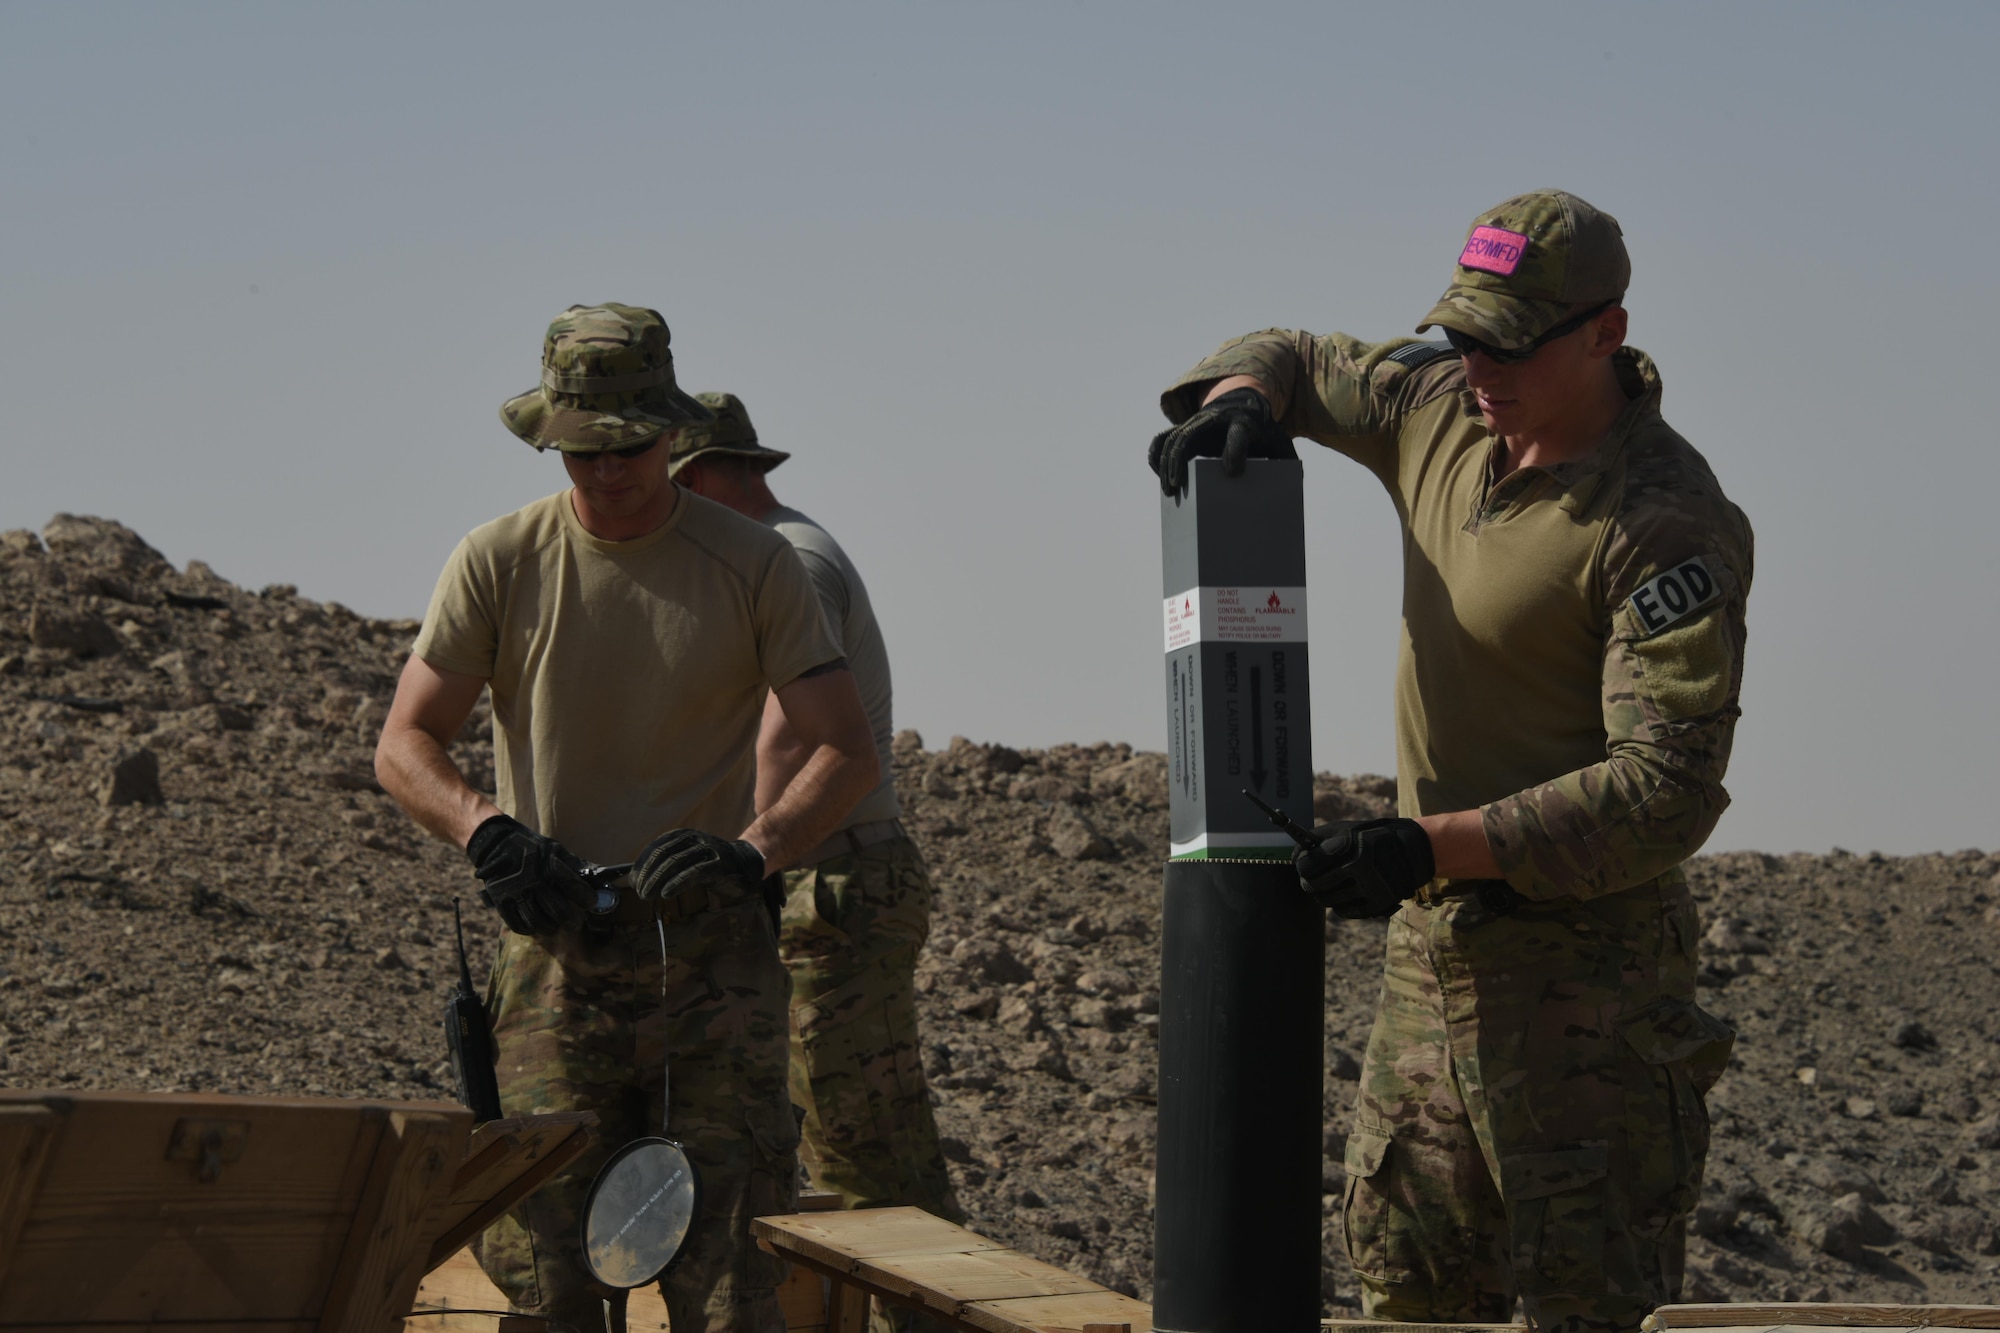 Senior Airman Merit Davey, an Explosive Ordnance Disposal journeyman with the 386th Expeditionary Civil Engineer Squadron, pulls a flare from its canister during an ammunition disposal request burn operation at an undisclosed location in Southwest Asia, May 11, 2017. The stockpile of expired munitions consisting primarily of flares was transported to an isolated location where the unserviceable items were stacked in a man-made hole in preparation for destruction. (U.S. Air Force photo/ Tech. Sgt. Jonathan Hehnly)